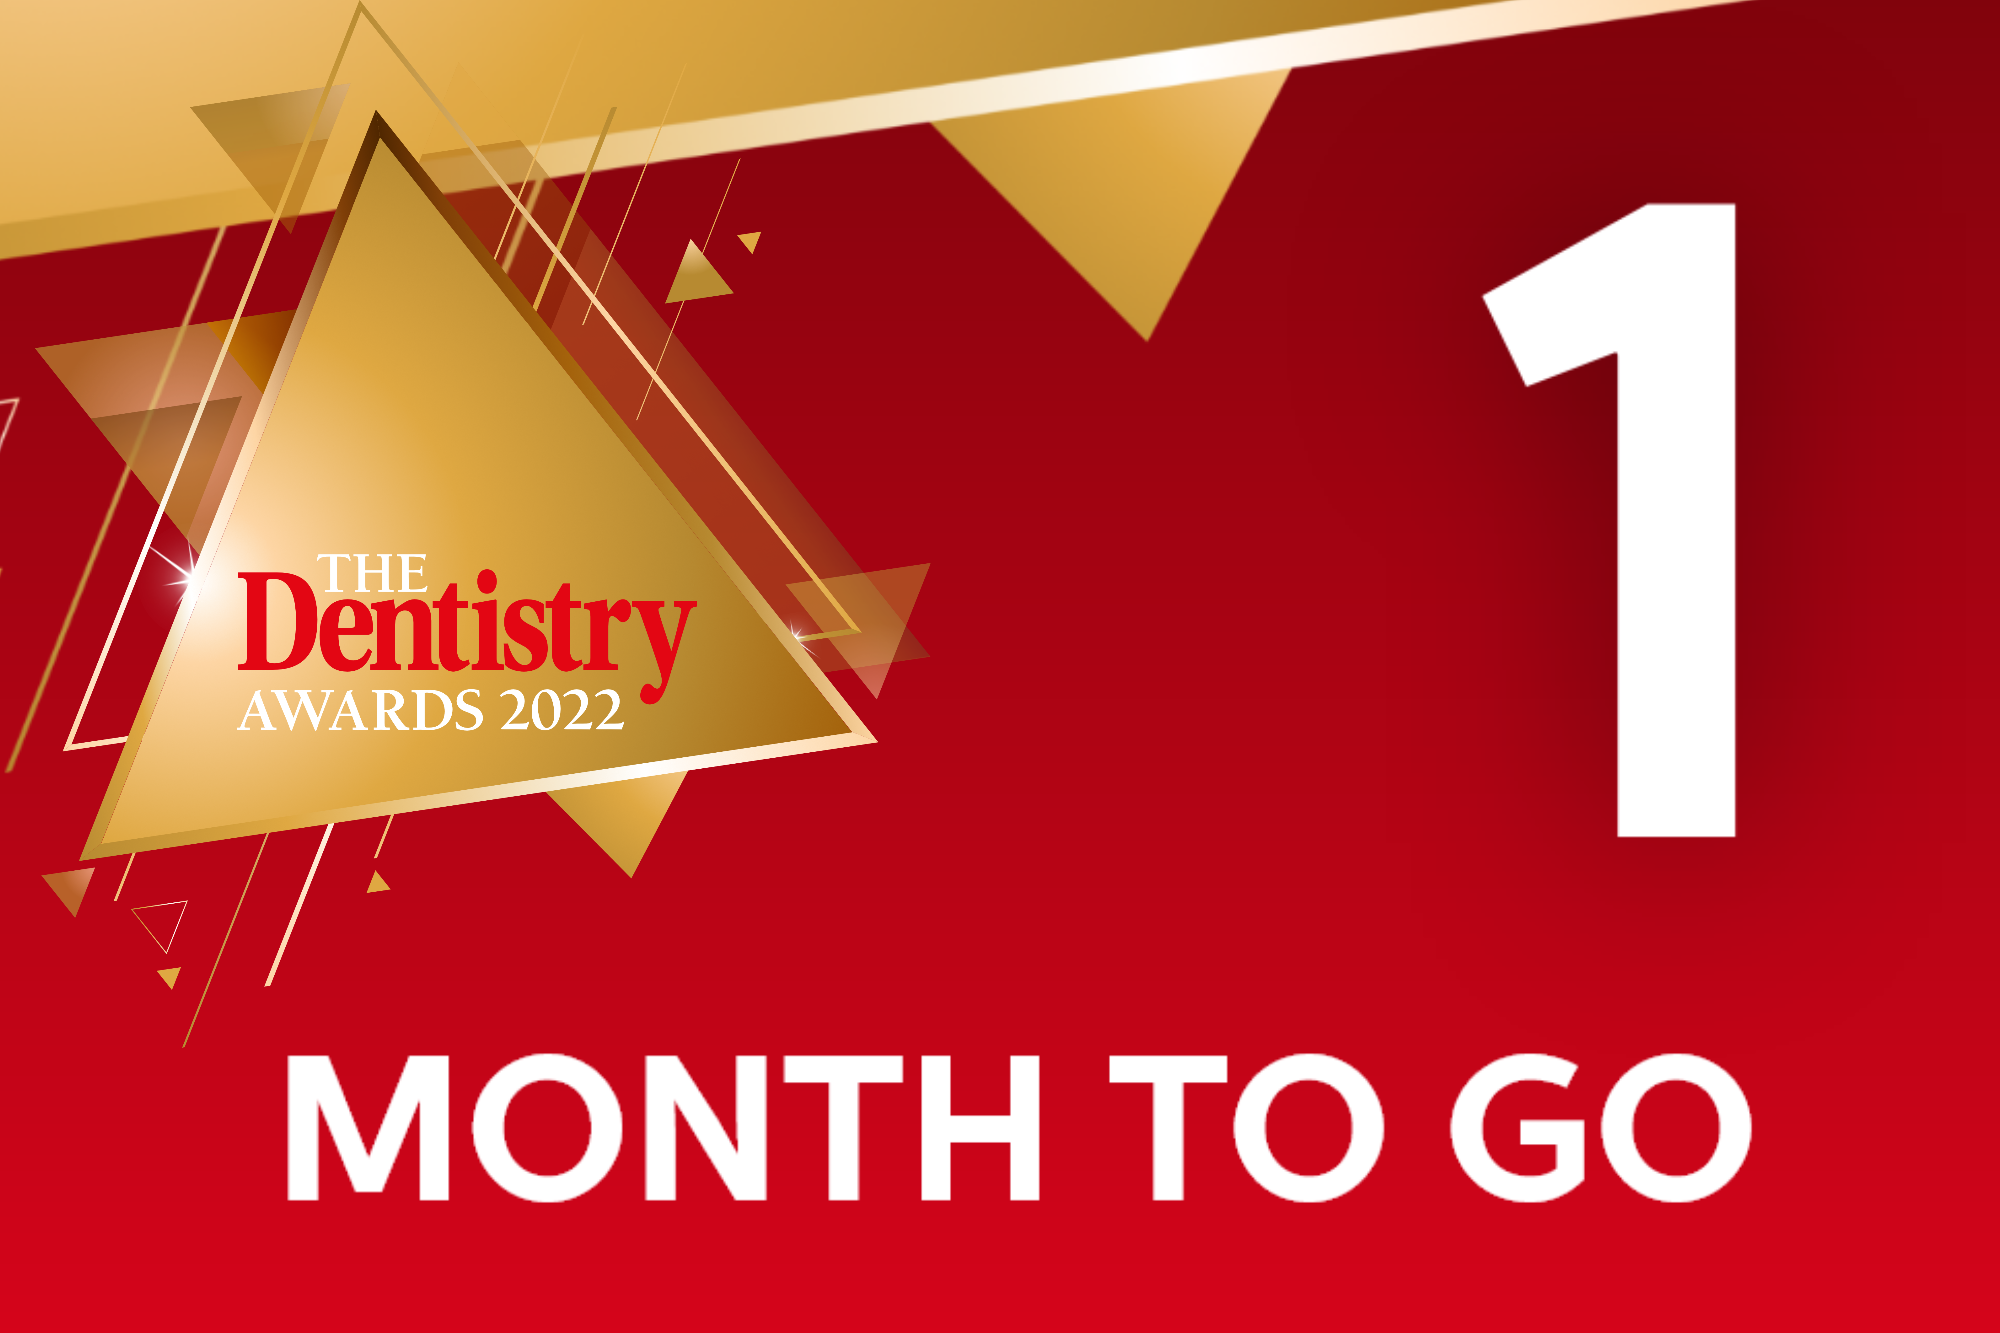 Dentistry Awards – one month to go